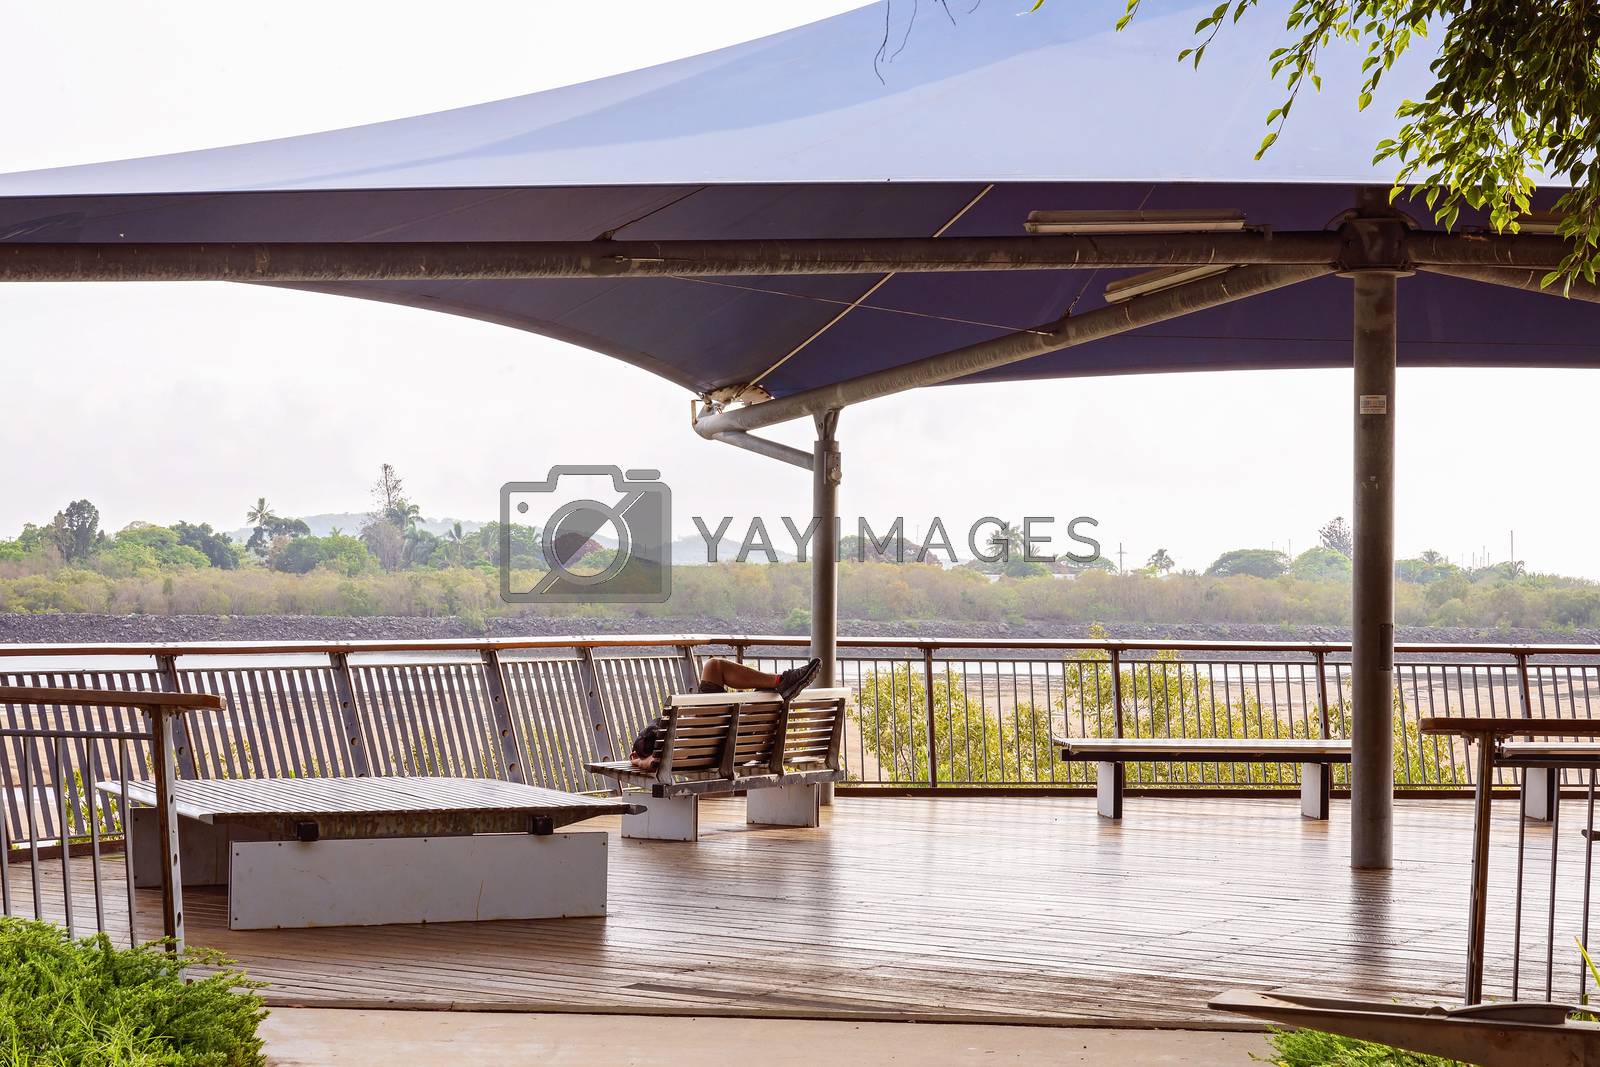 Royalty free image of Covered Shade Area For Recreation On The River Bank by 	JacksonStock